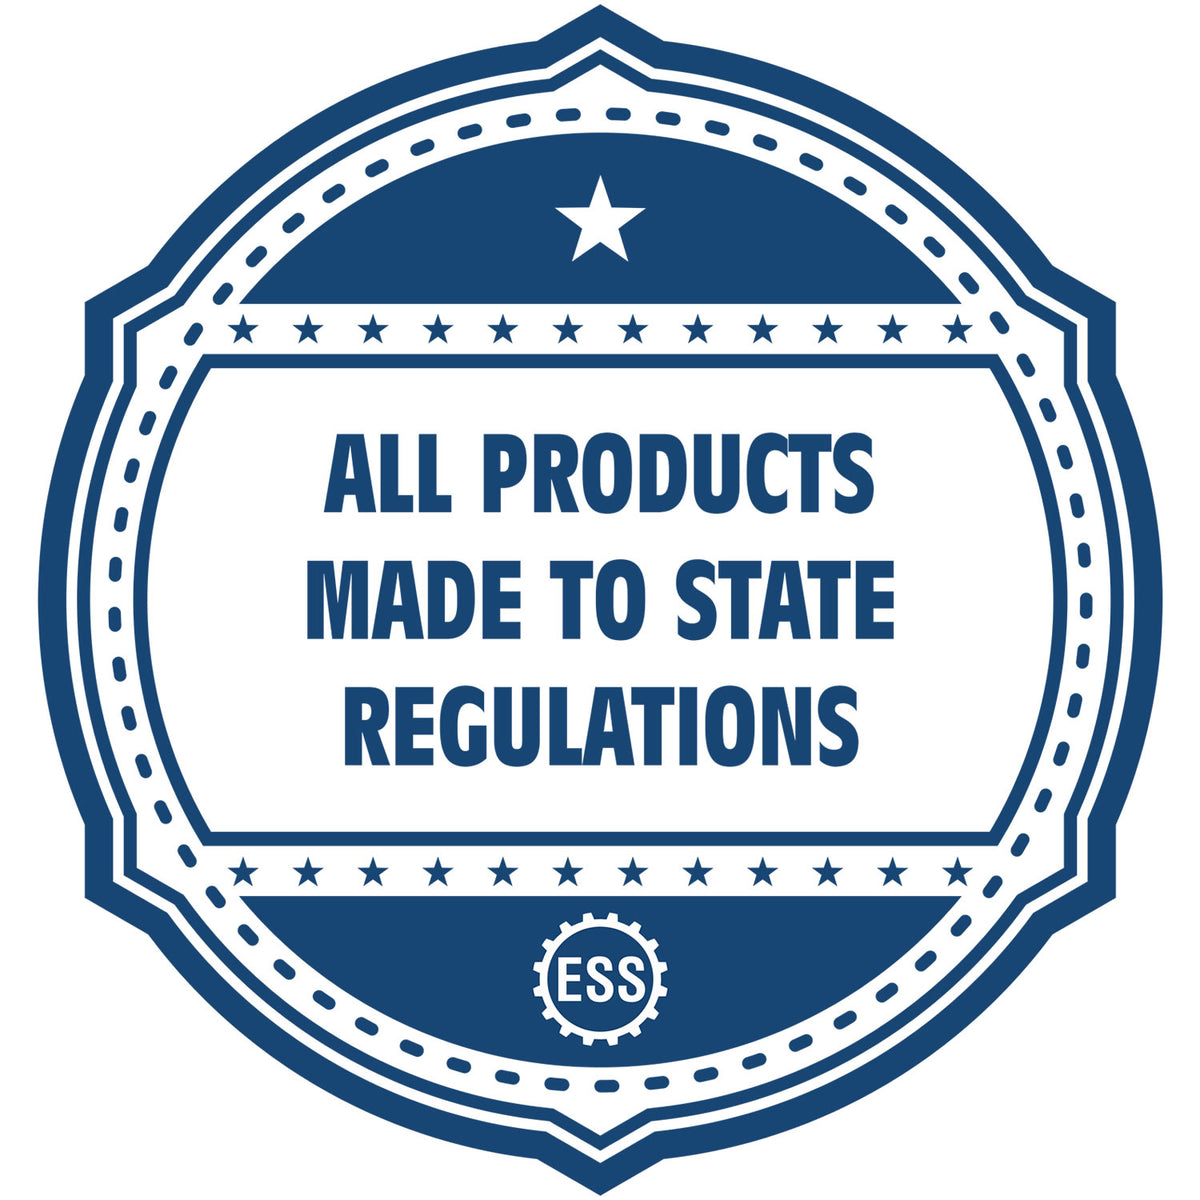 An icon or badge element for the MaxLight Premium Pre-Inked Georgia Rectangular Notarial Stamp showing that this product is made in compliance with state regulations.